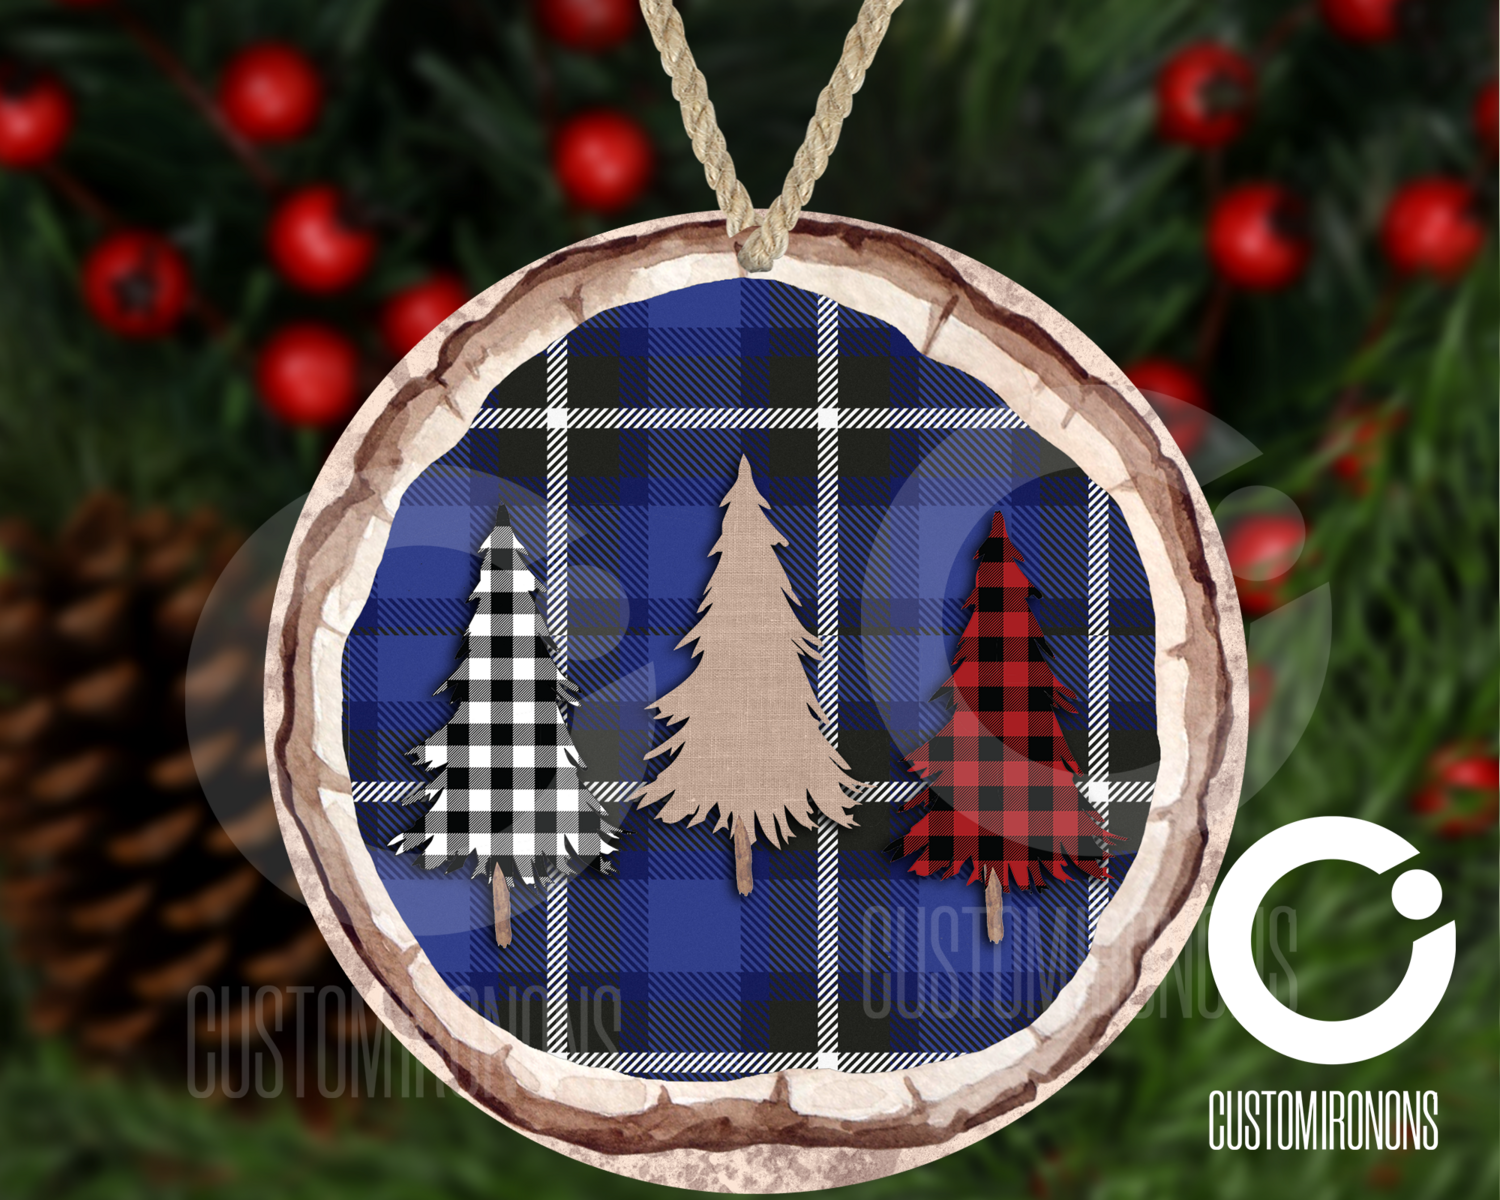 SET OF 4 Wood Round Plaid Ornament- Winter Holiday Ornament